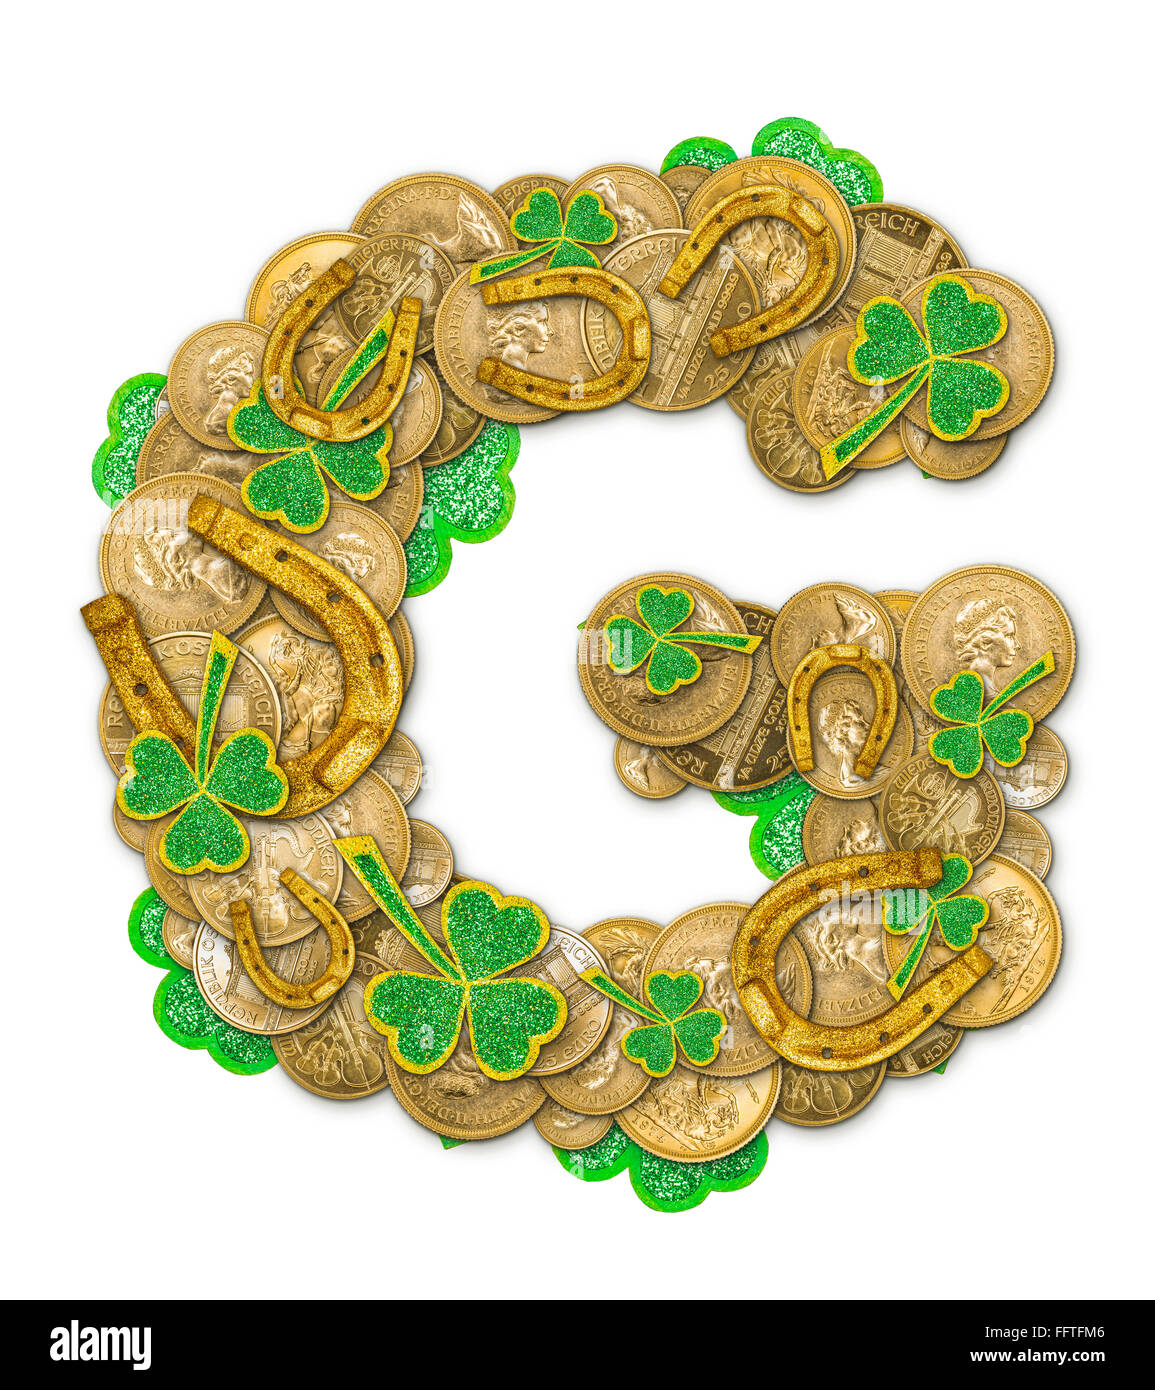 St. Patricks Day holiday letter G made of coins, shamrocks and  horseshoes Stock Photo